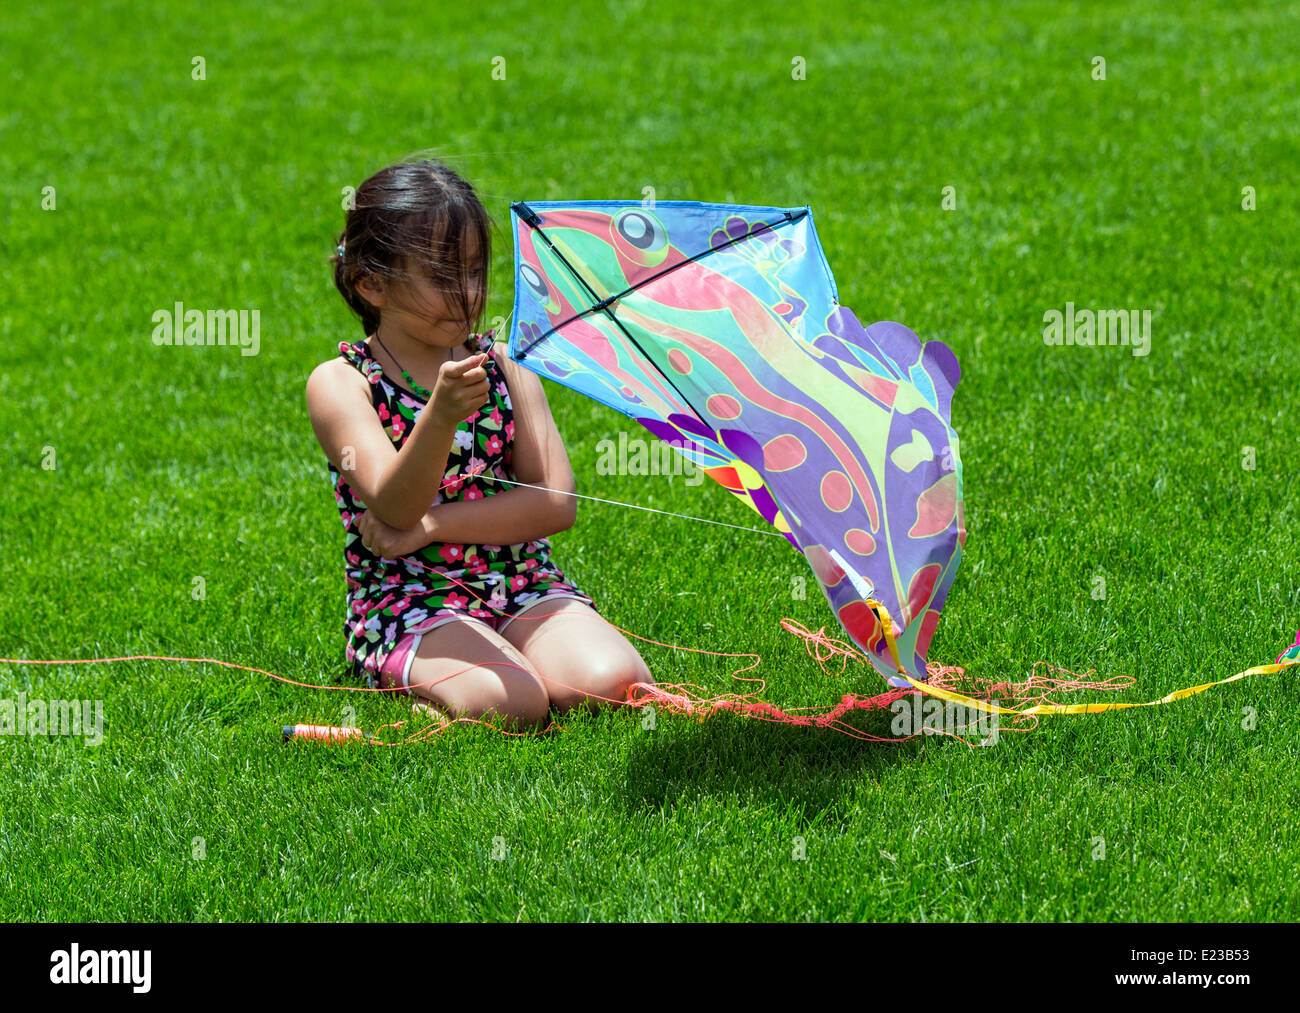 Young hispanic girl flying a kite on a grassy field Stock Photo